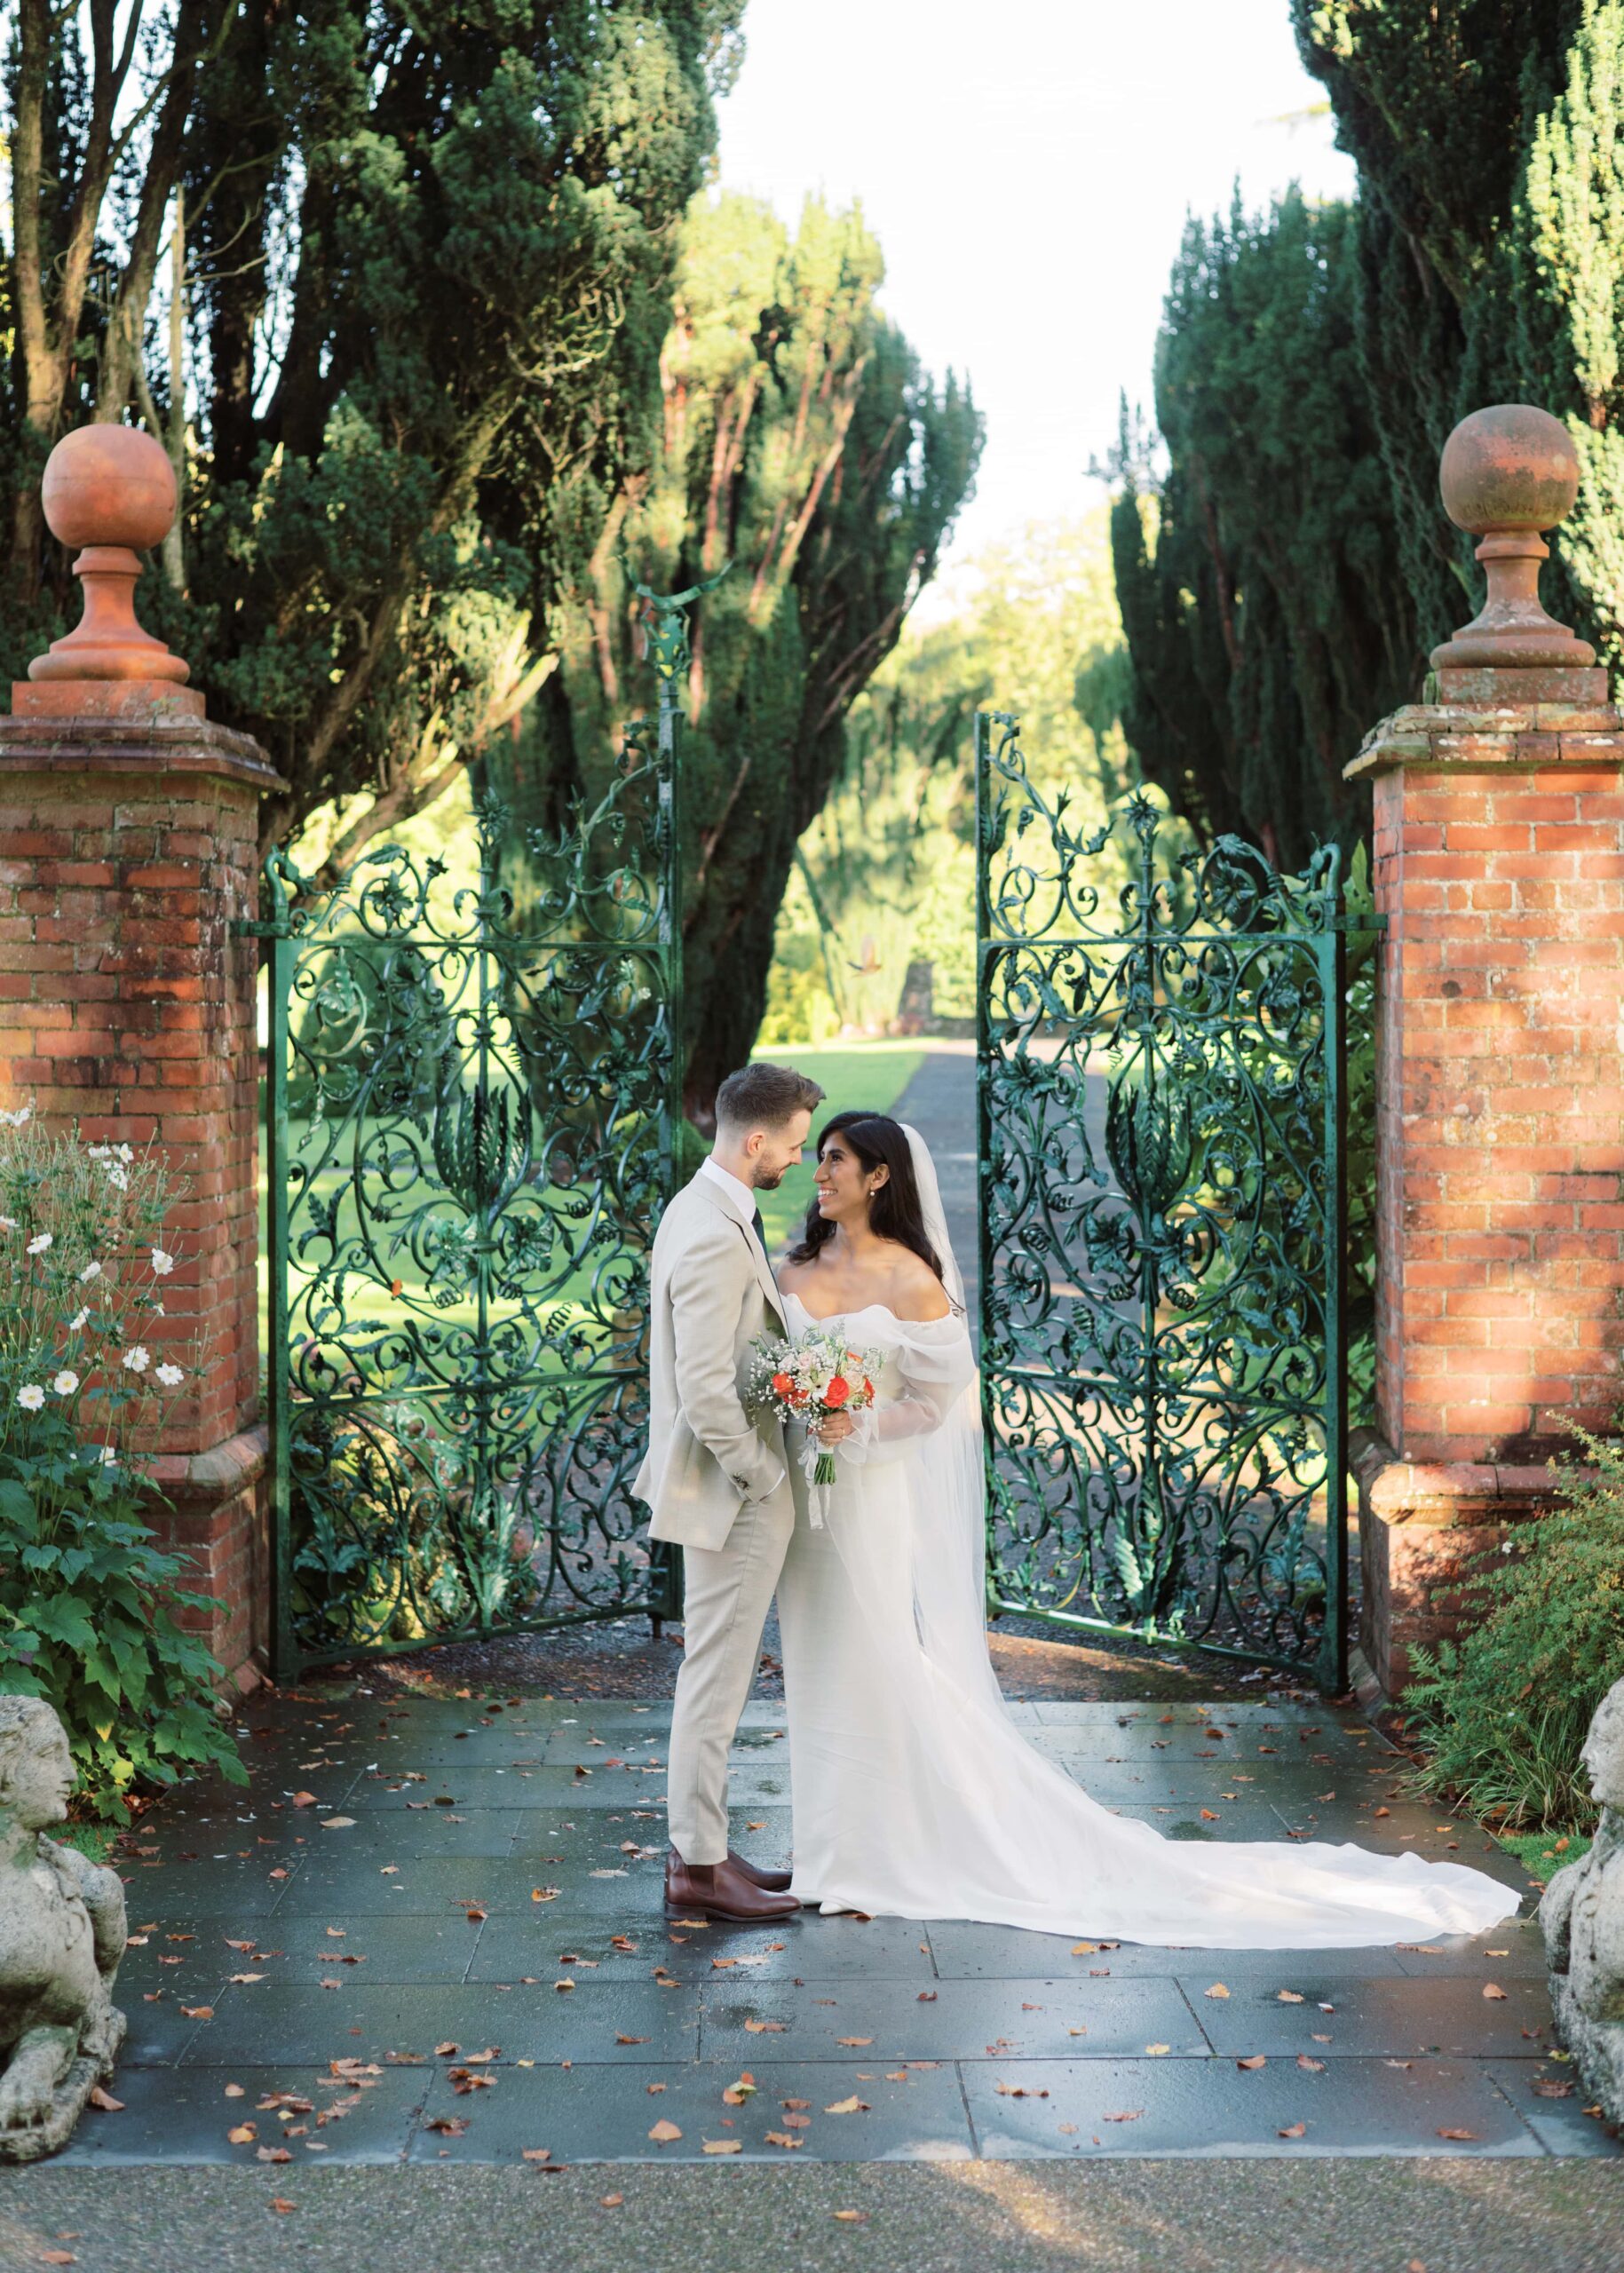 Newlywed couple pose in front of the gates of the walled garden in the autumn.